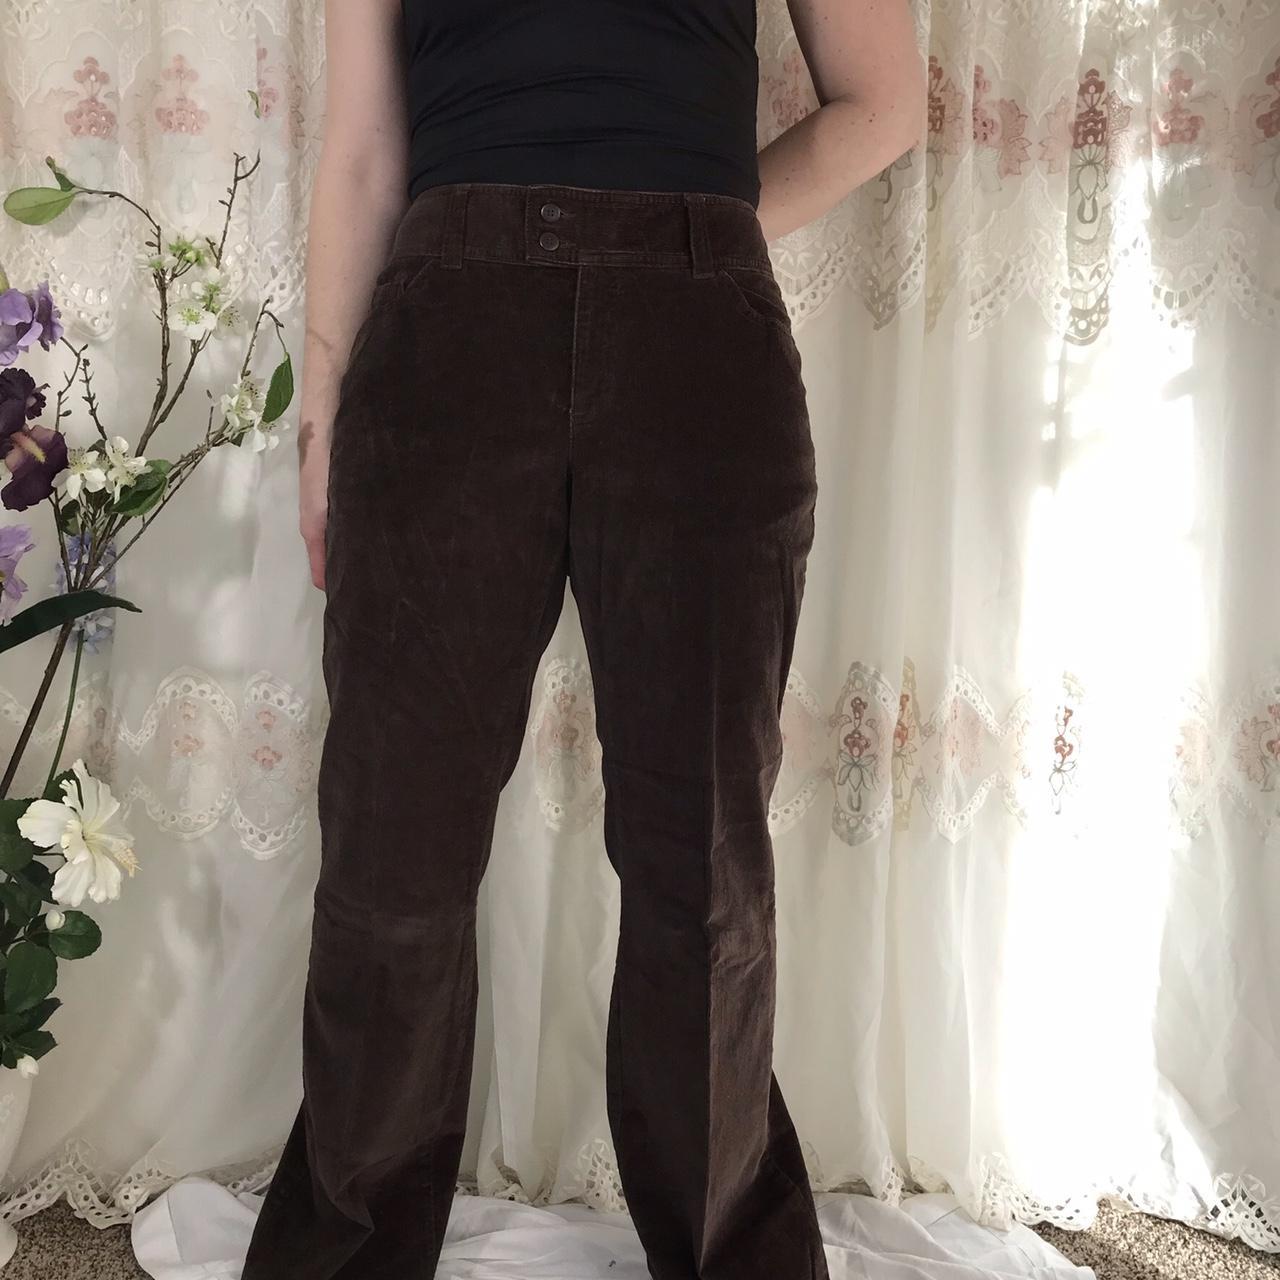 Product Image 2 - Rich brown wide leg corduroy